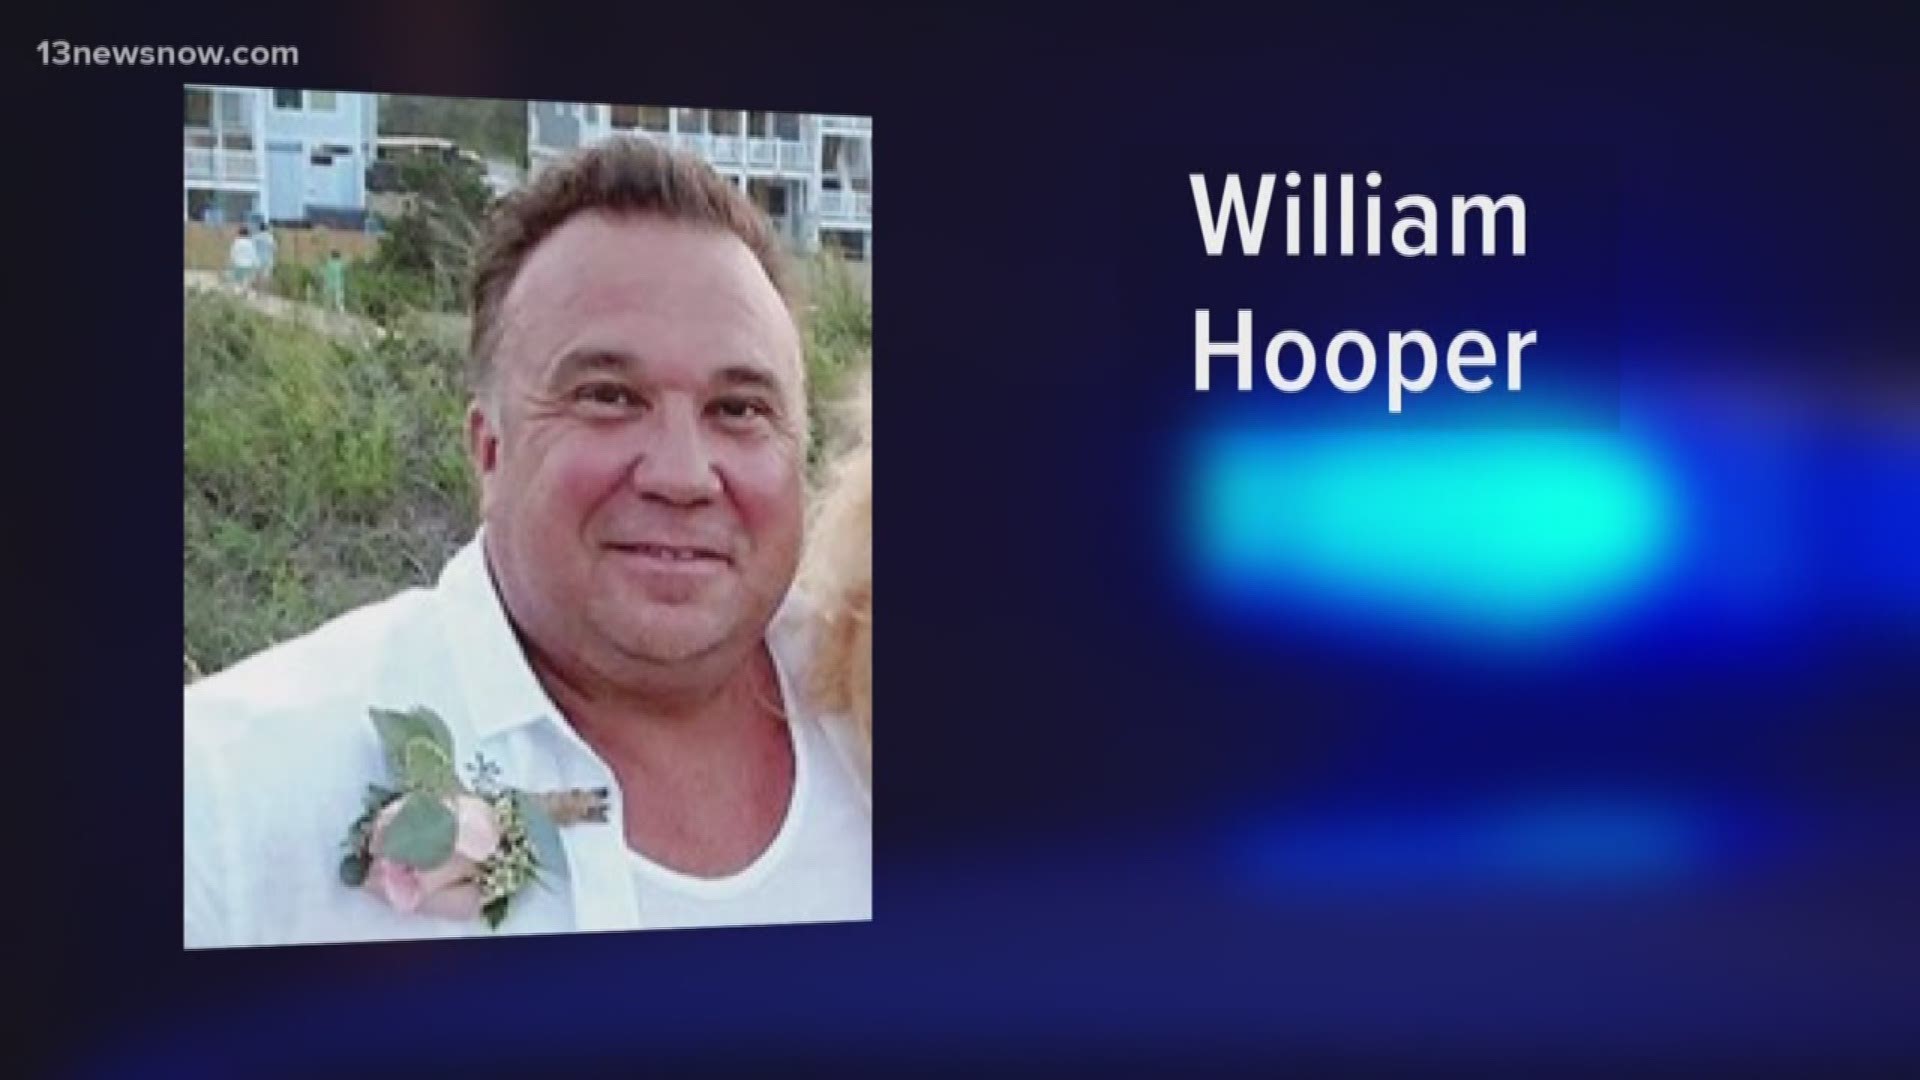 Major J. T. Williams said William "Billy" Hooper was arrested in La Plata, Maryland. He was charged as a fugitive and needs to be extradited back to Virginia.